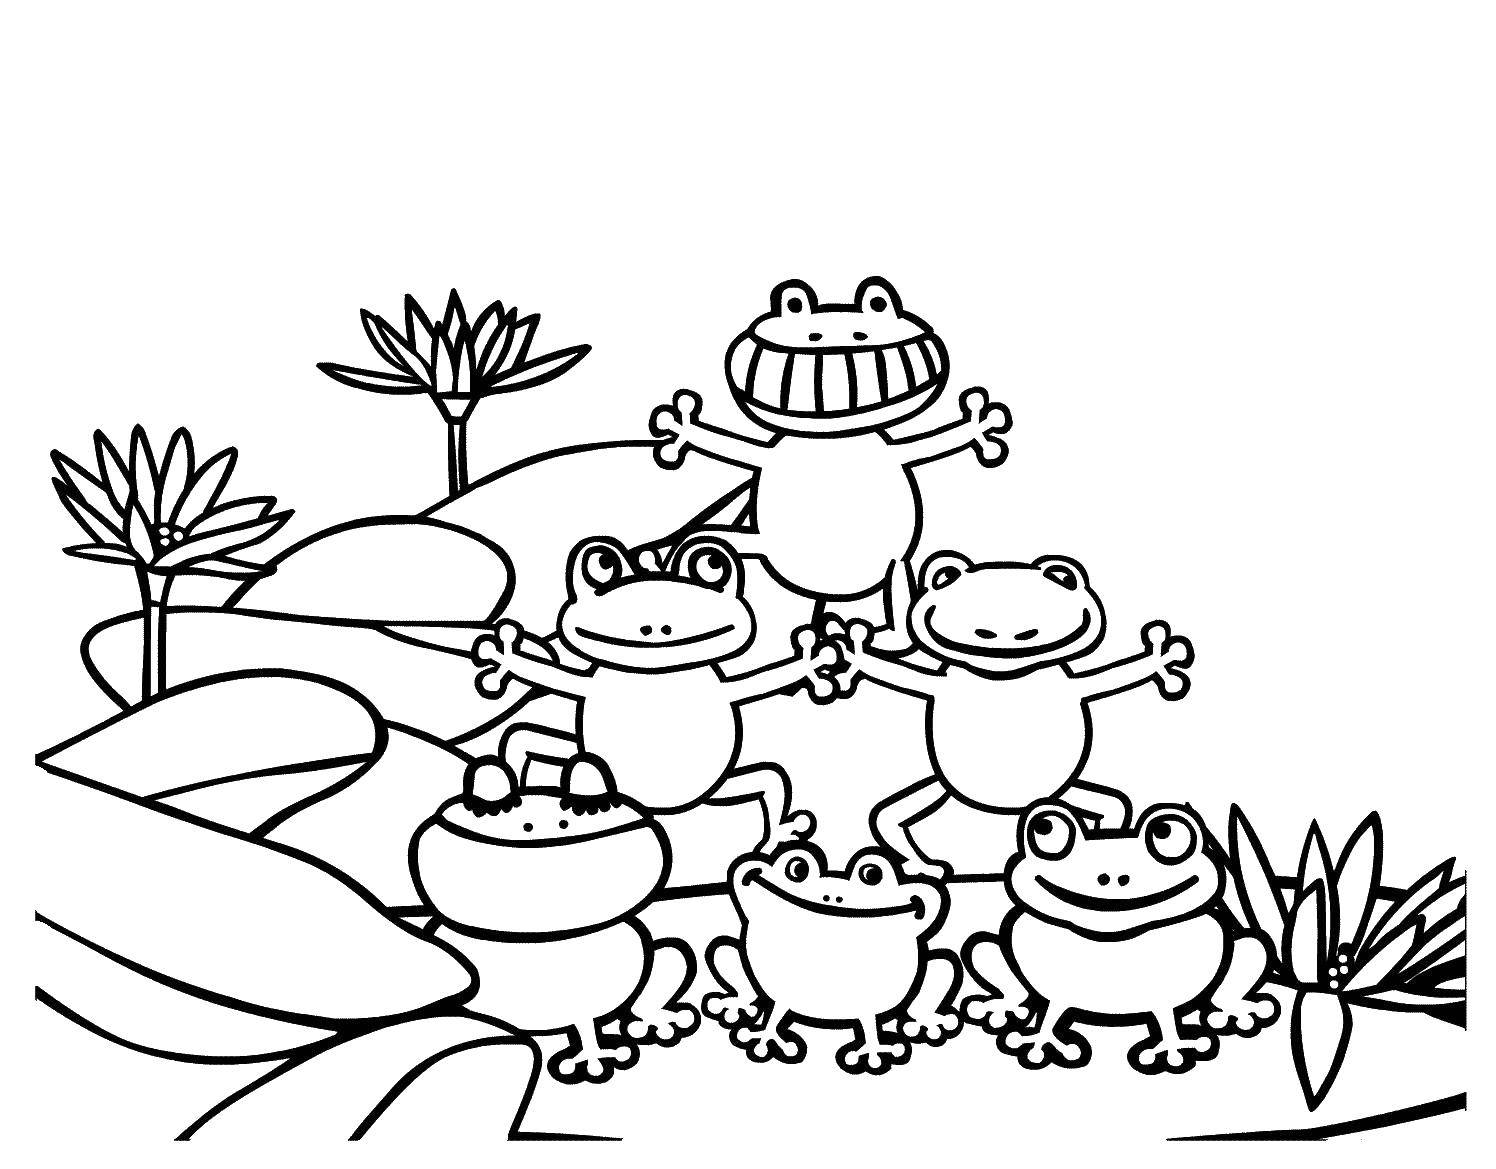 Coloring Lampshade. Category the frog. Tags:  Reptile, frog.